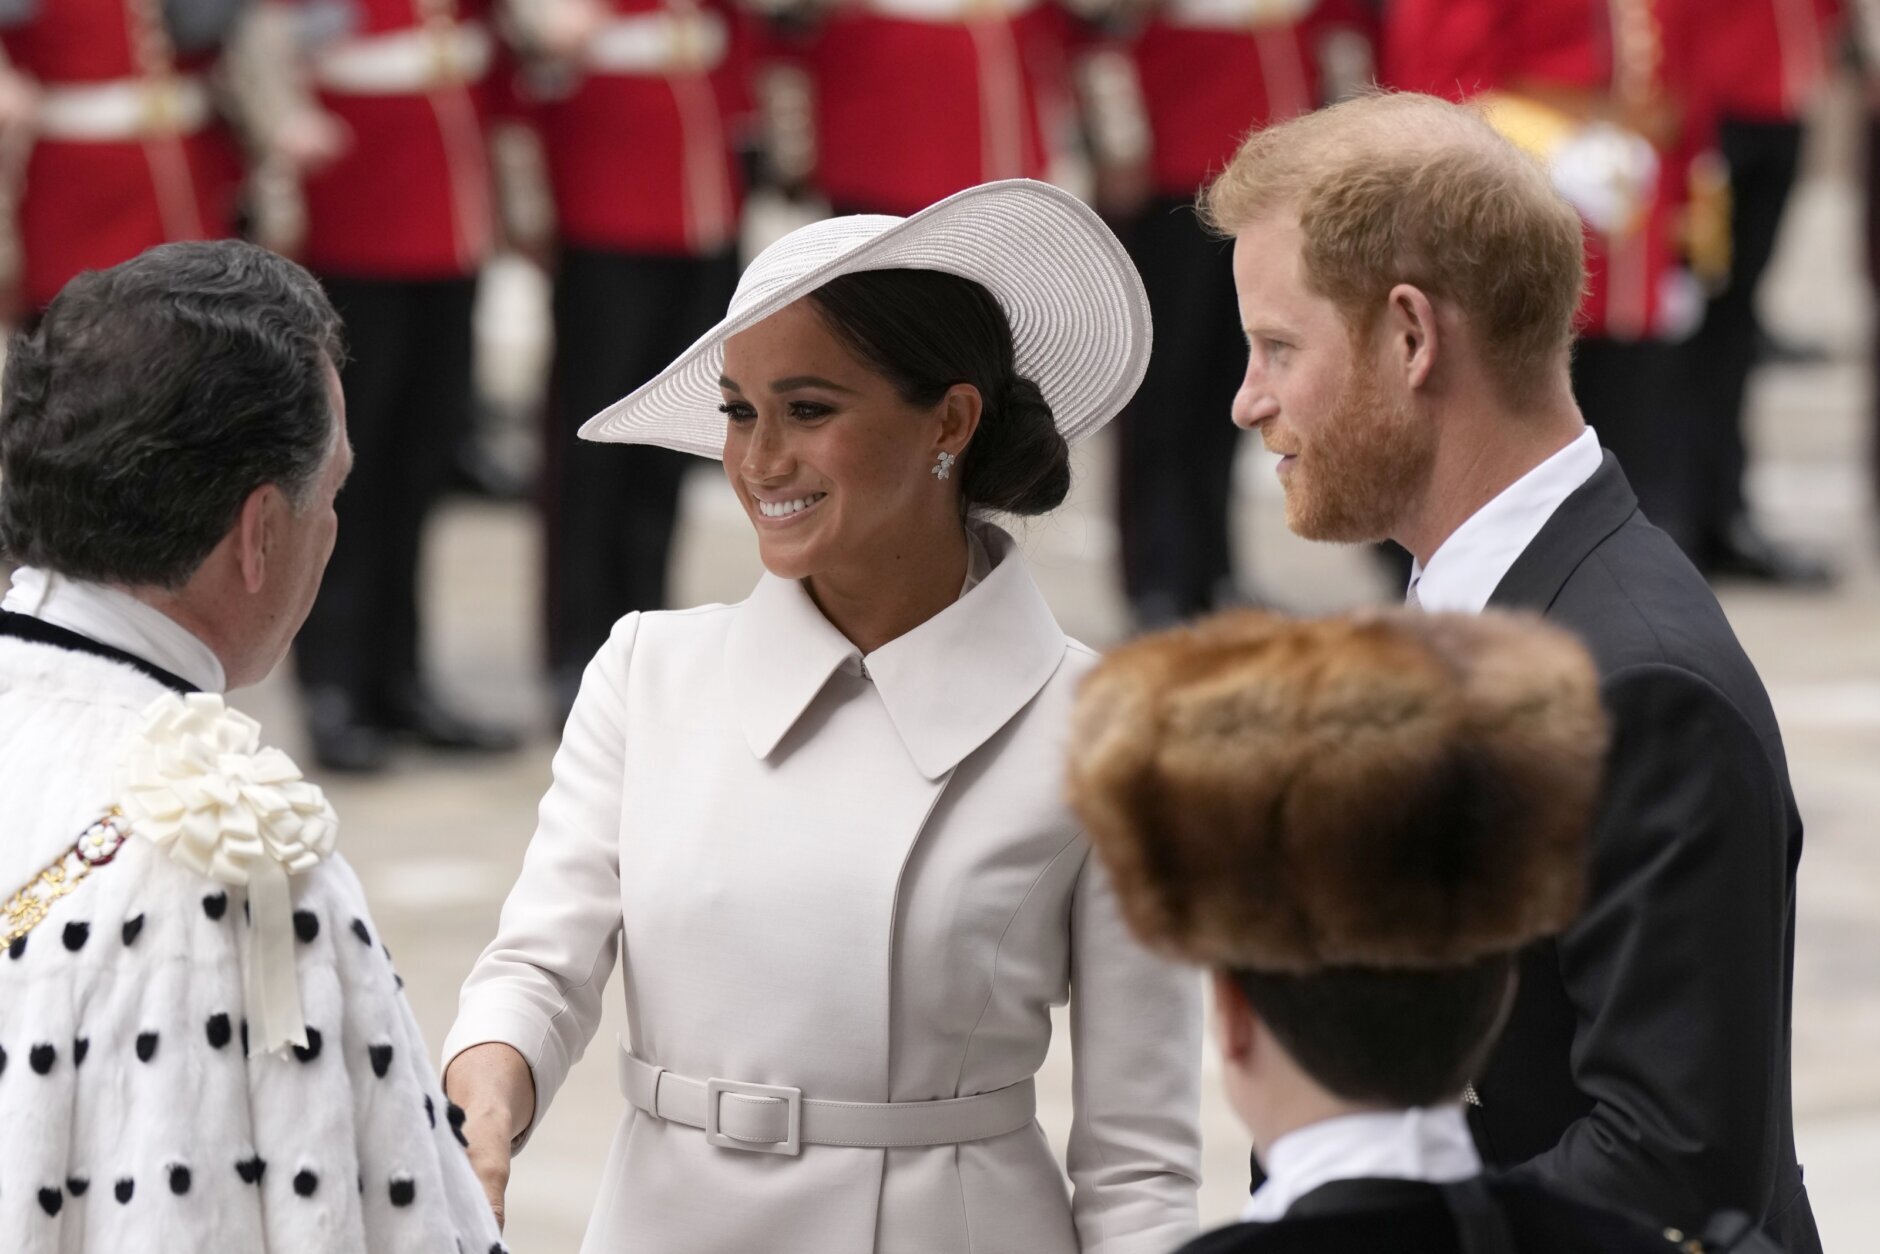 Prince Harry and Meghan Markle, Duke and Duchess of Sussex arrive for a service of thanksgiving for the reign of Queen Elizabeth II at St Paul's Cathedral in London, Friday, June 3, 2022 on the second of four days of celebrations to mark the Platinum Jubilee. The events over a long holiday weekend in the U.K. are meant to celebrate the monarch's 70 years of service. (AP Photo/Matt Dunham, Pool)